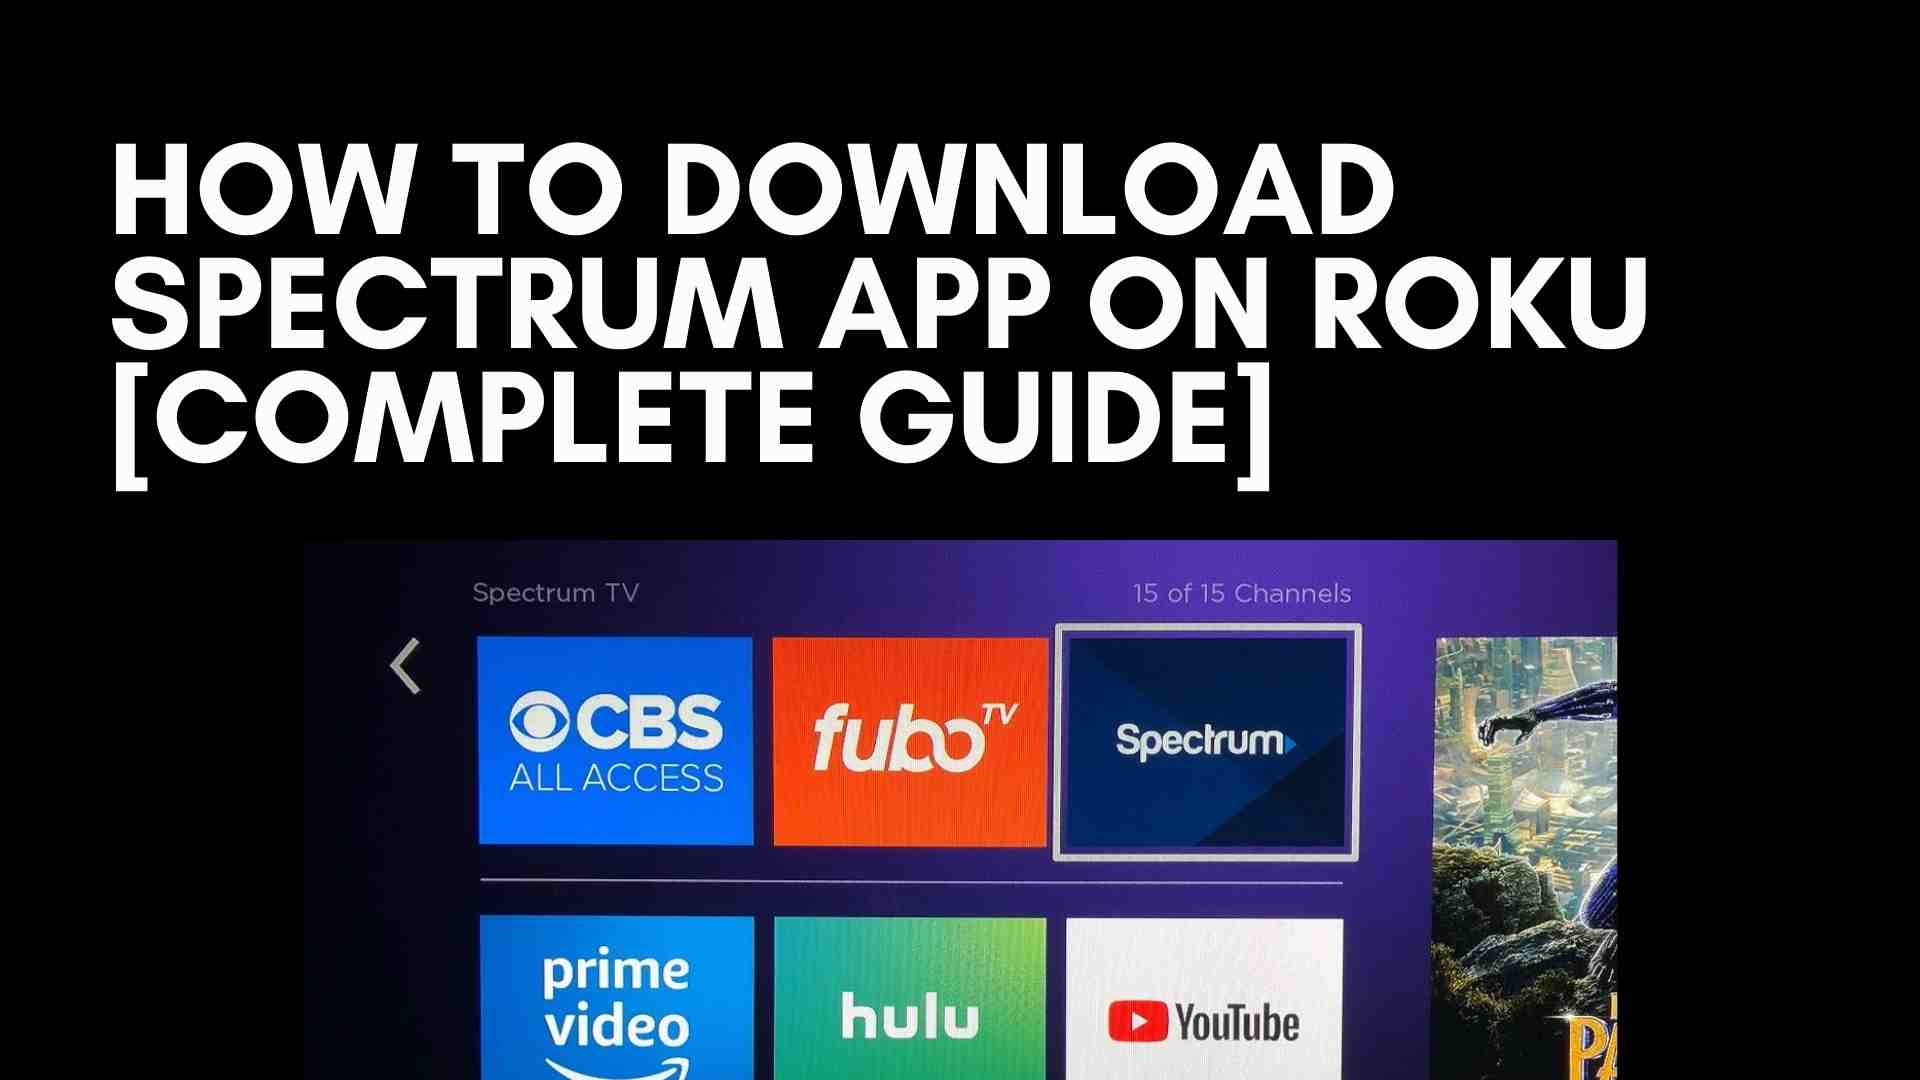 How to Download Spectrum App on Roku Guide] ViralTalky